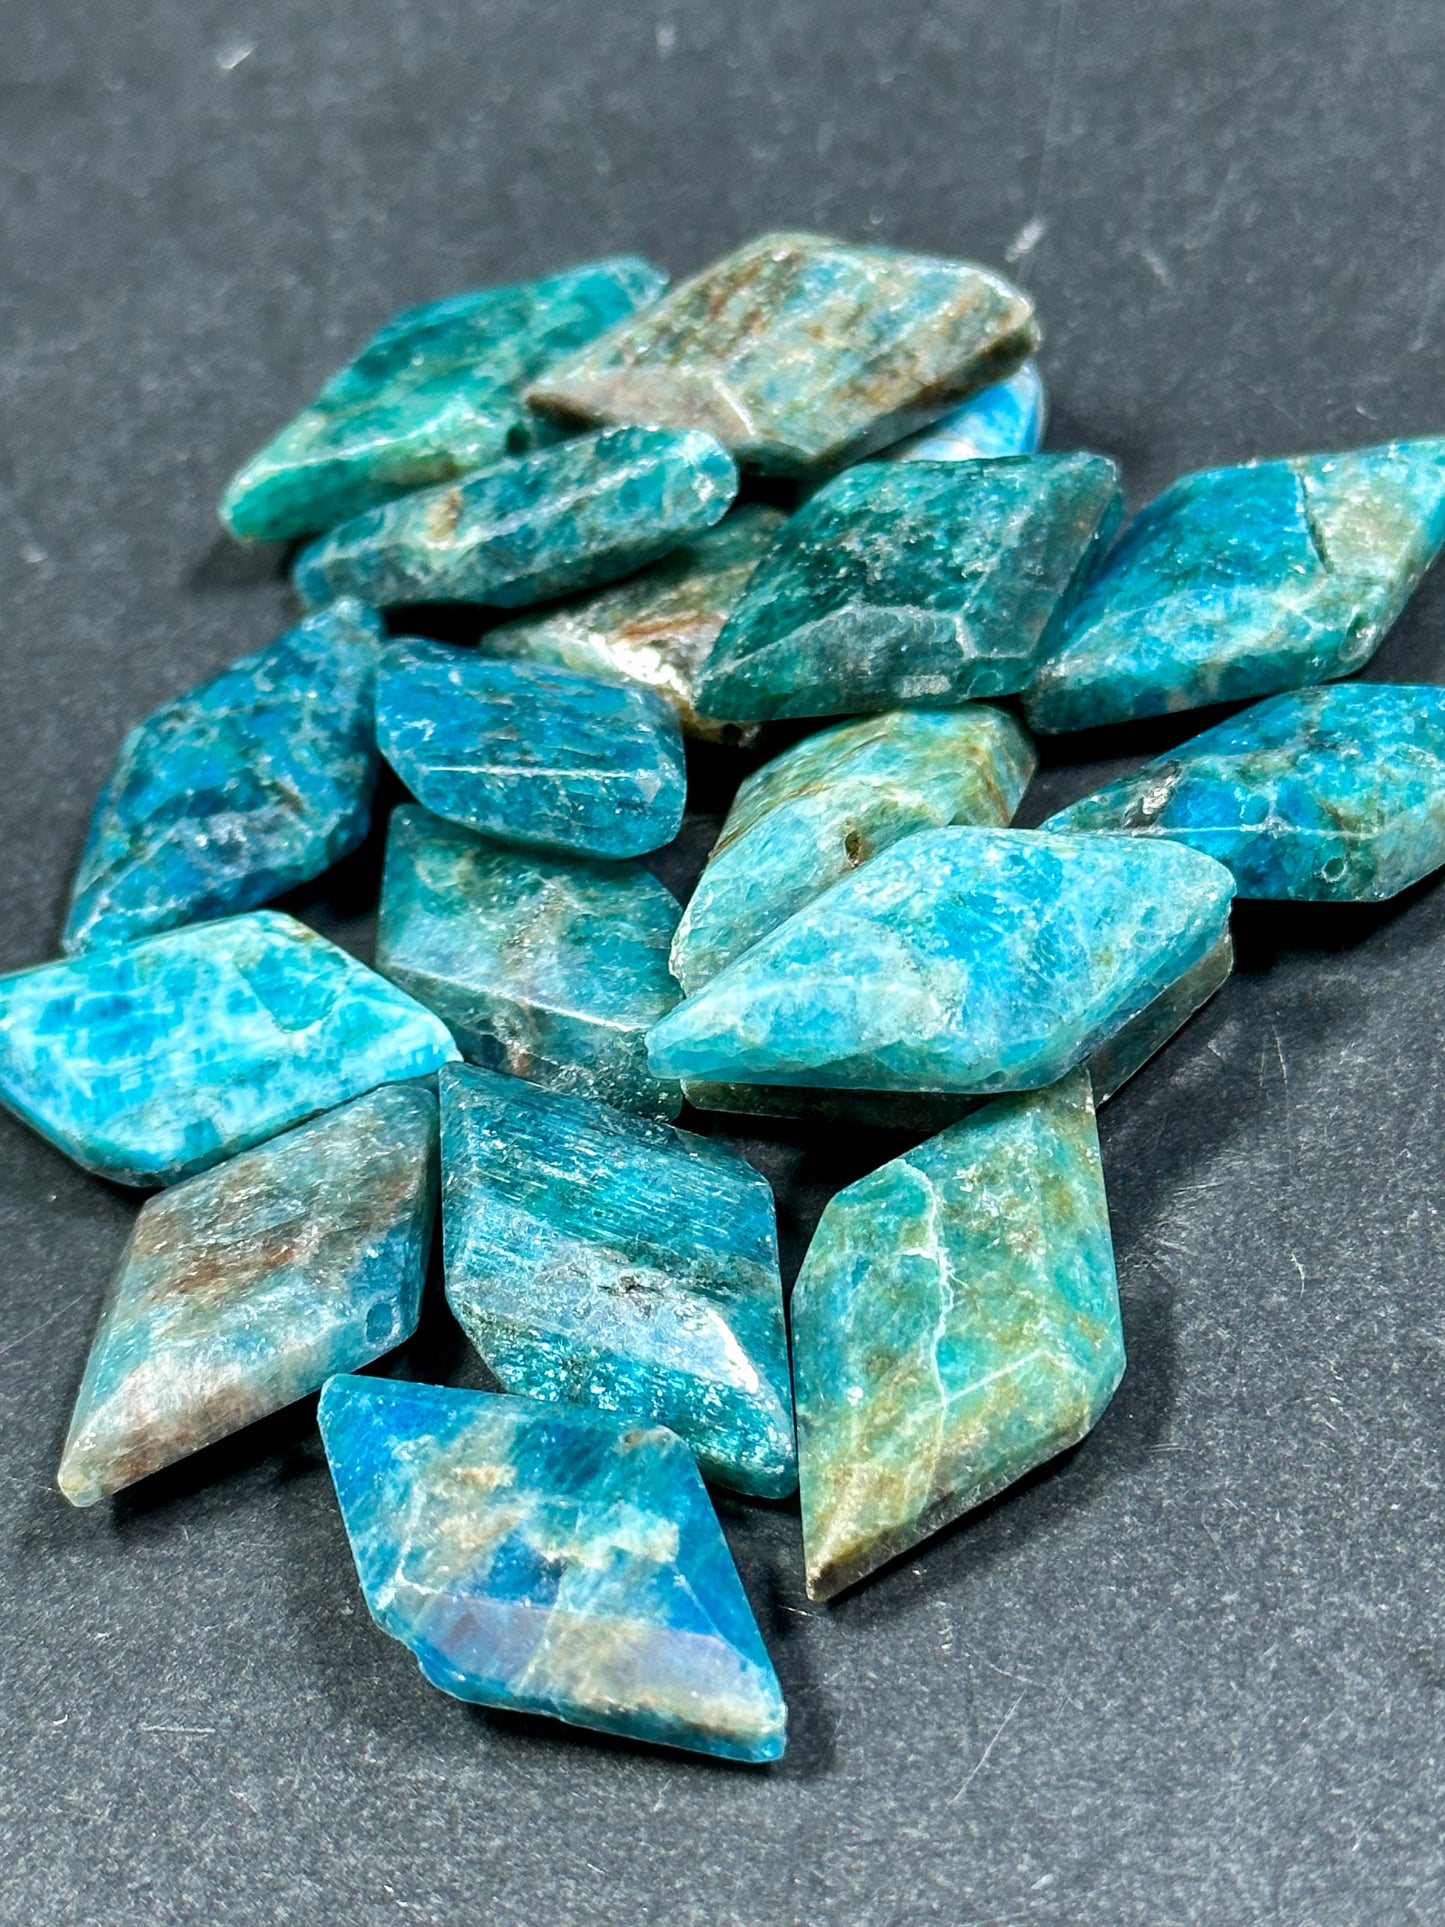 AAA NATURAL Blue Apatite Gemstone Bead Faceted 29x16mm Diamond Shape, Gorgeous Natural Blue Color Apatite Gemstone Bead, LOOSE Beads